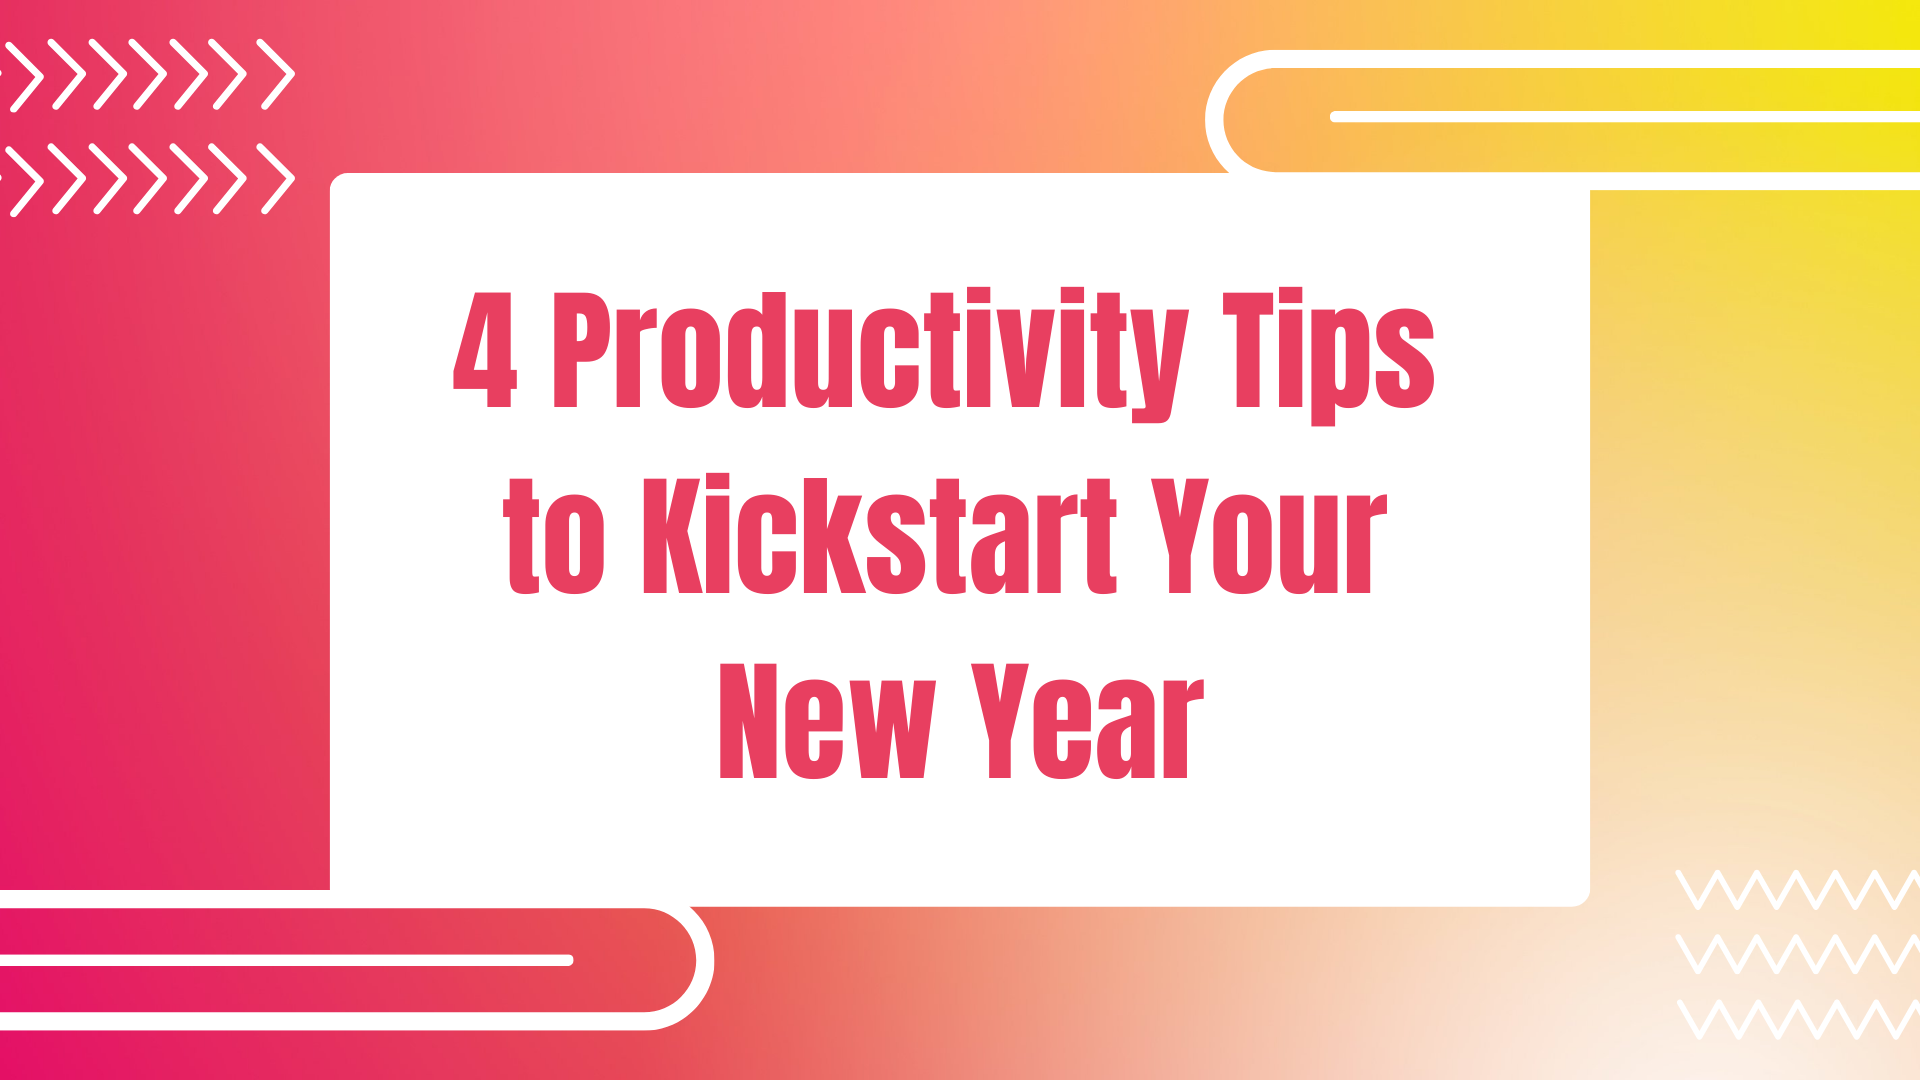 4 Productivity Tips From 1 Accounts To Kickstart Your New Year